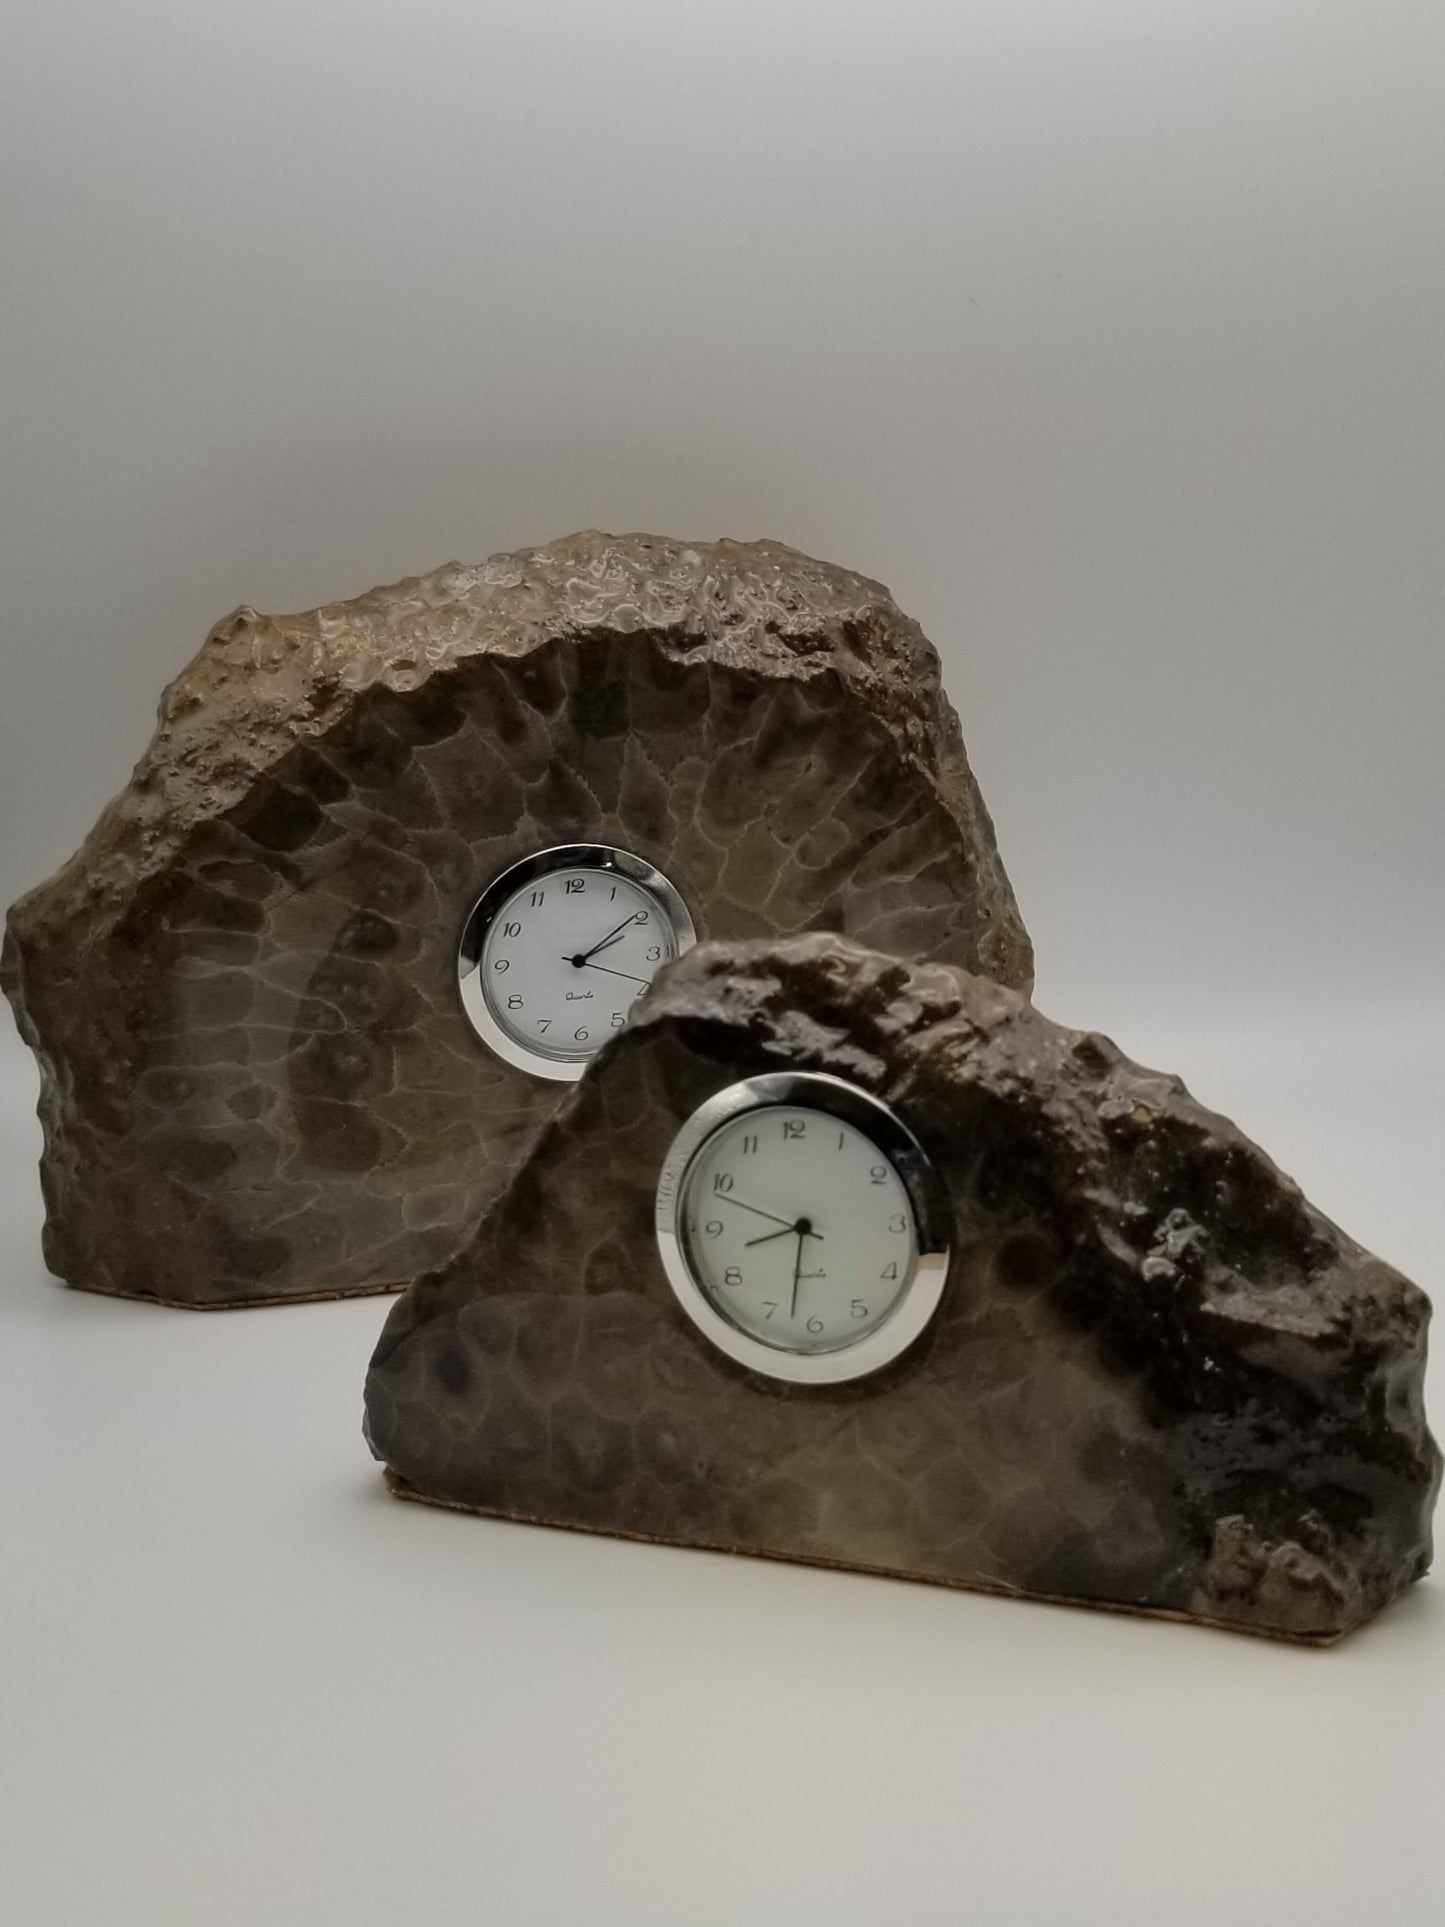 Two petoskey stone deck clocks in a size large and a size medium. Both have silver Quartz clock hardware. Clocks stone design is a very natural shape but into a thick slab.